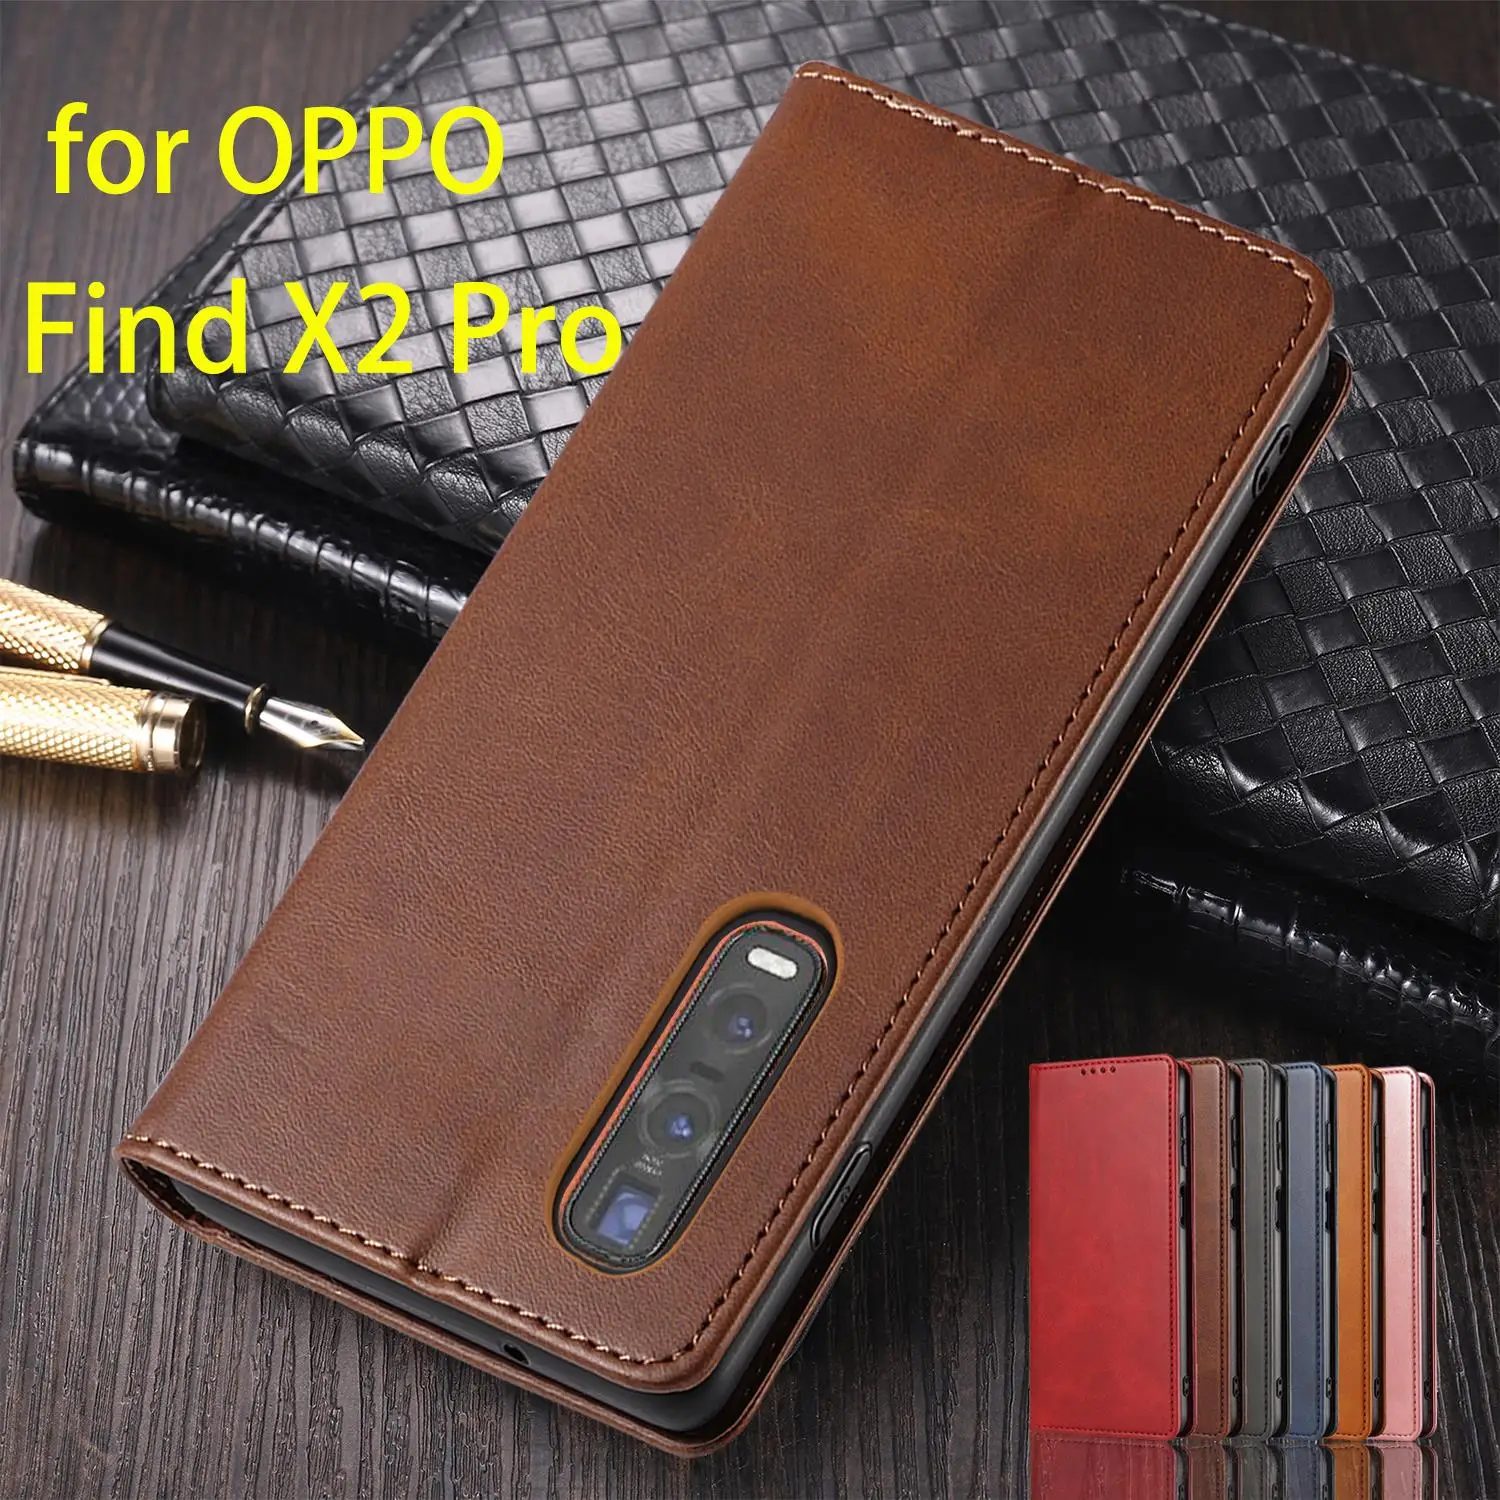 

Leather Case for OPPO Find X2 Pro 6.7" Flip Case Card Holder Holster Magnetic Attraction Cover Wallet Case Fundas Coque